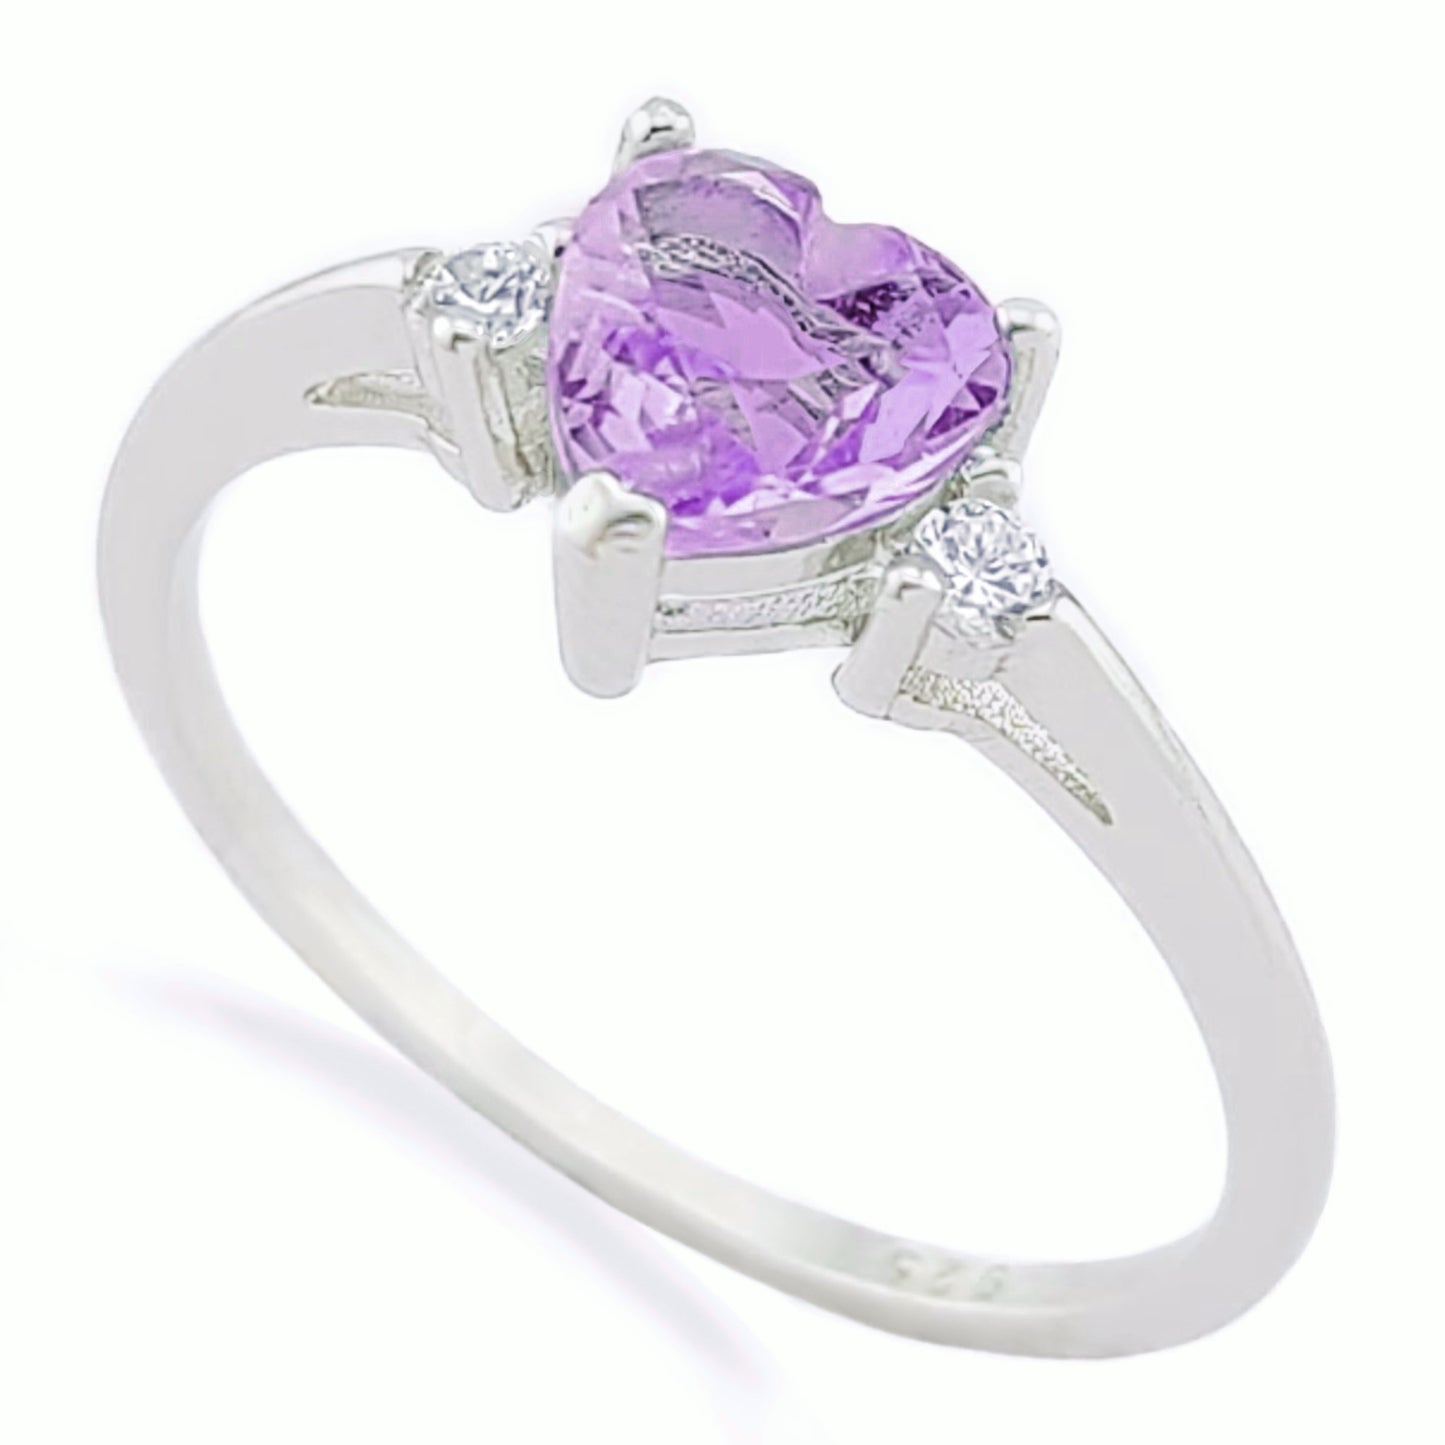 Fashion Women's 925 Sterling Silver Pink Stone CZ Heart Ring